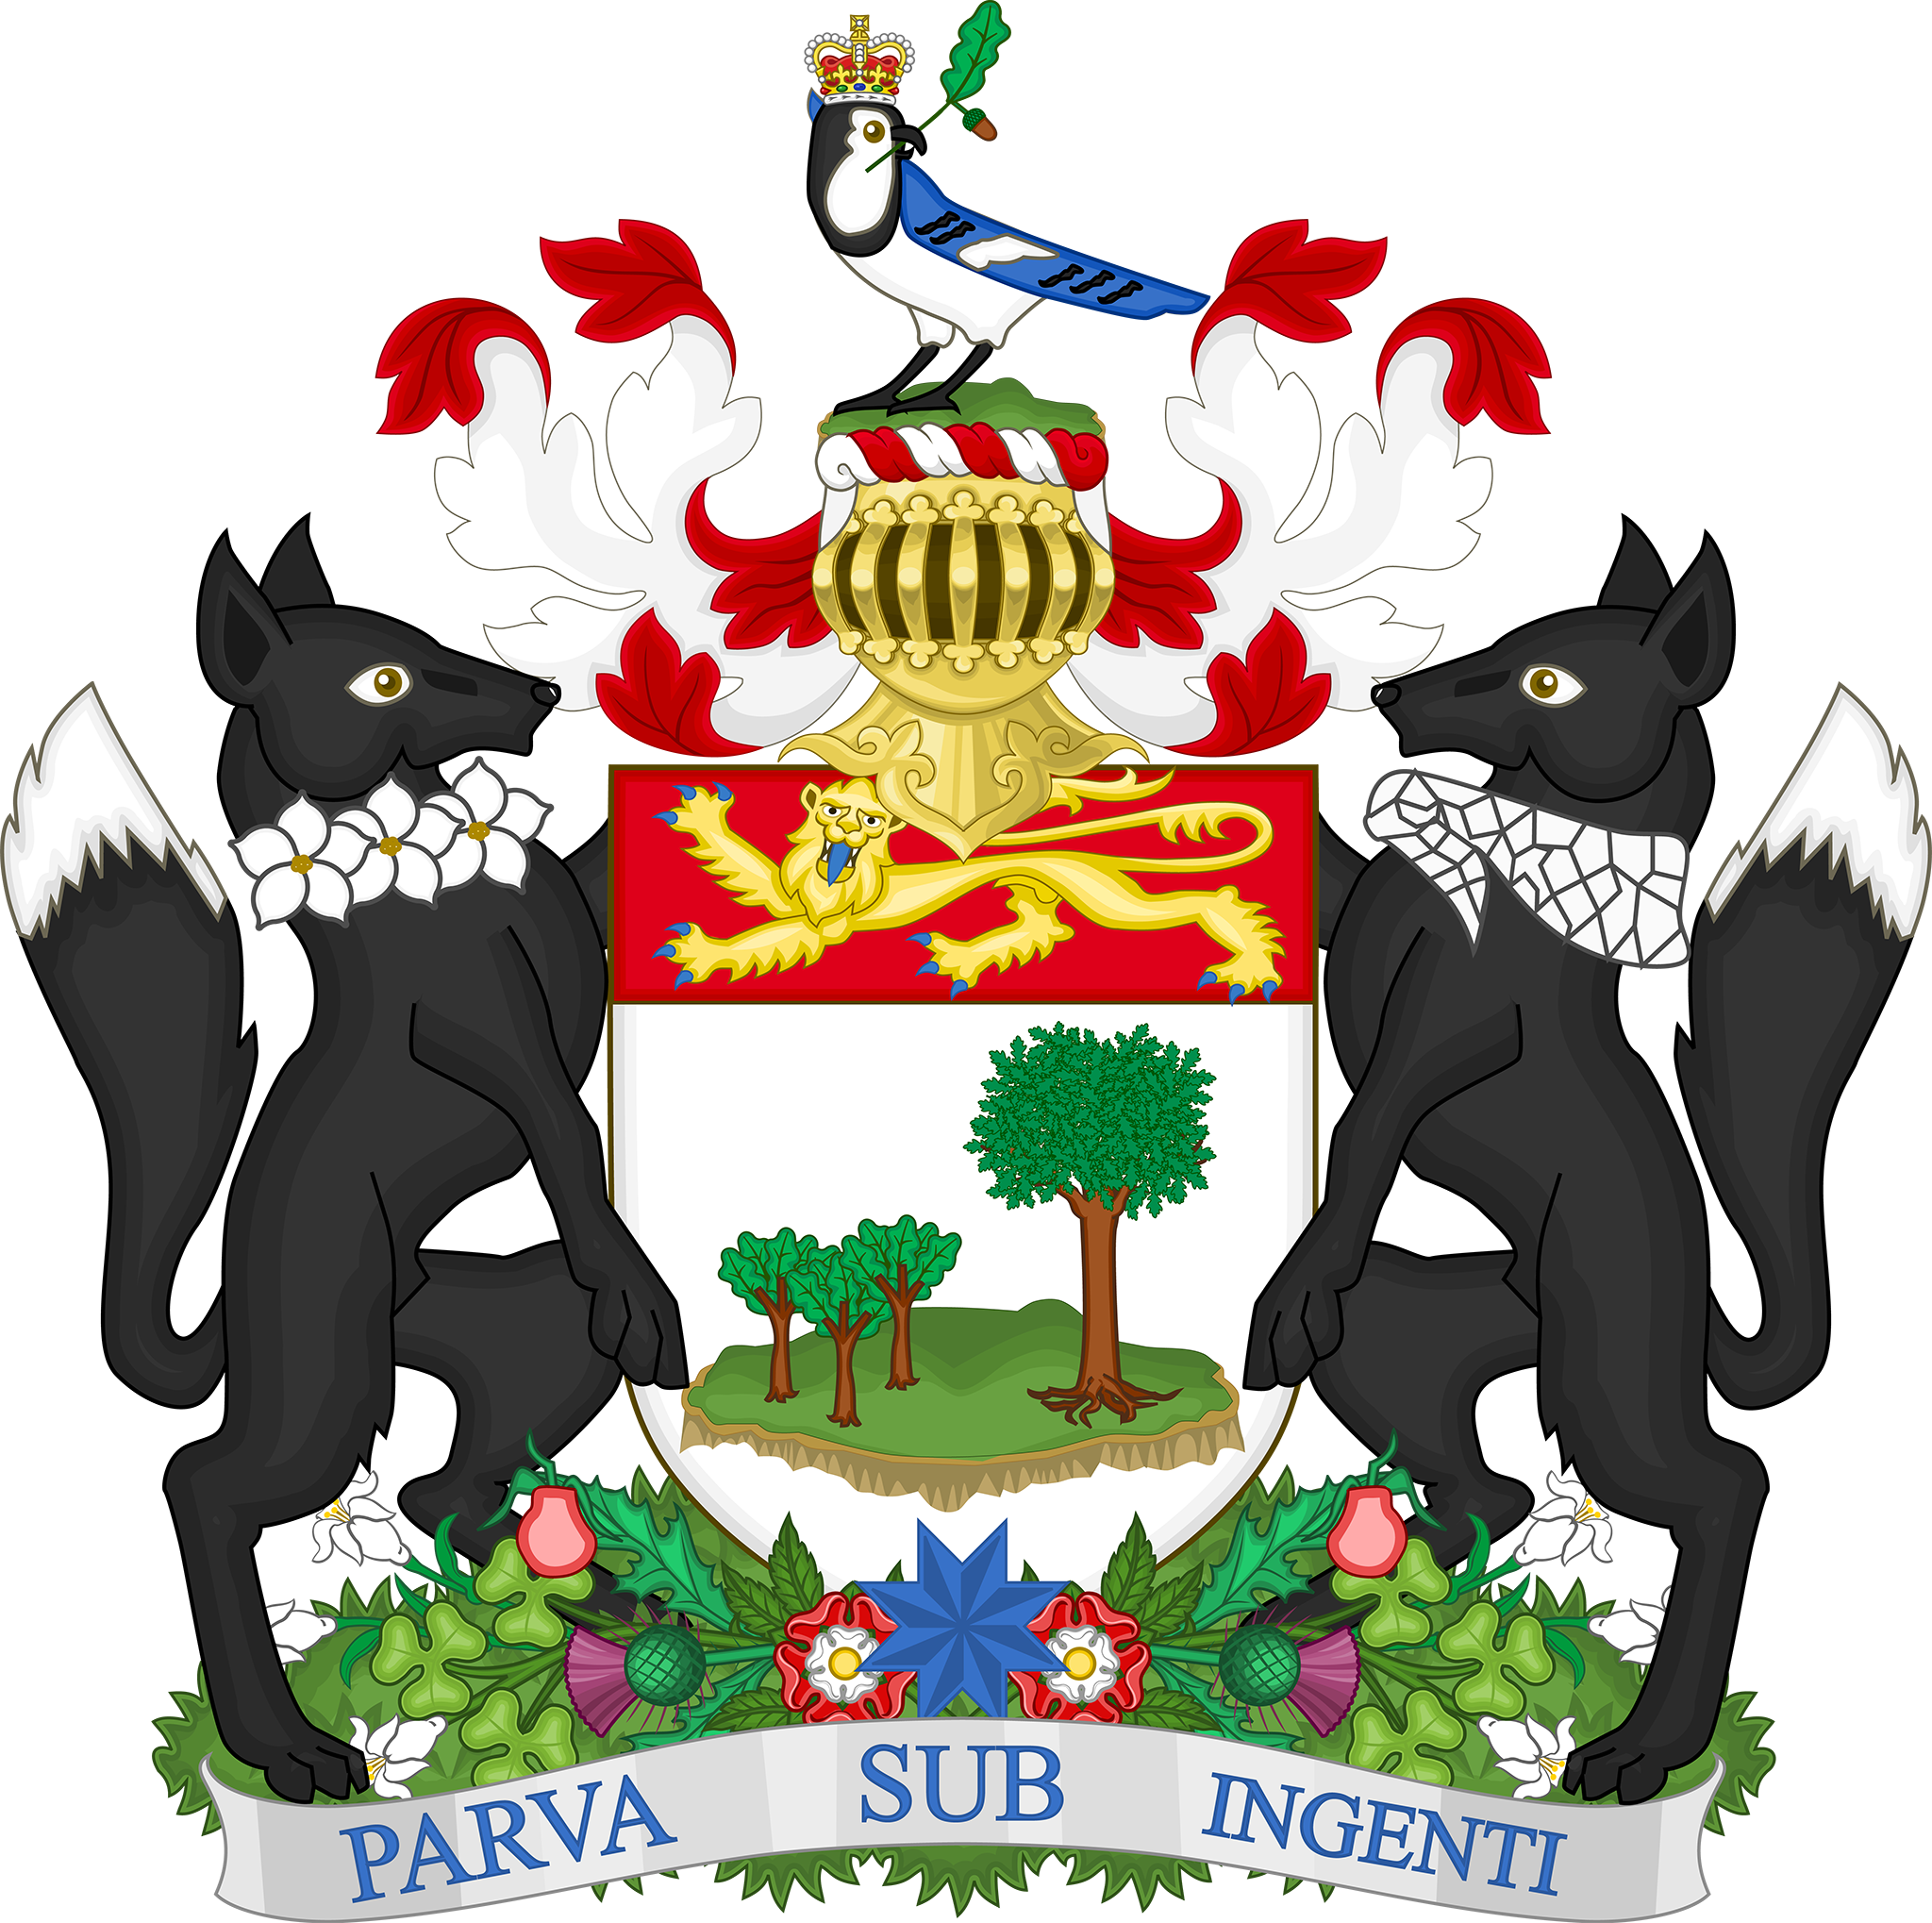 The coat of arms of Prince Edward Island, Canada